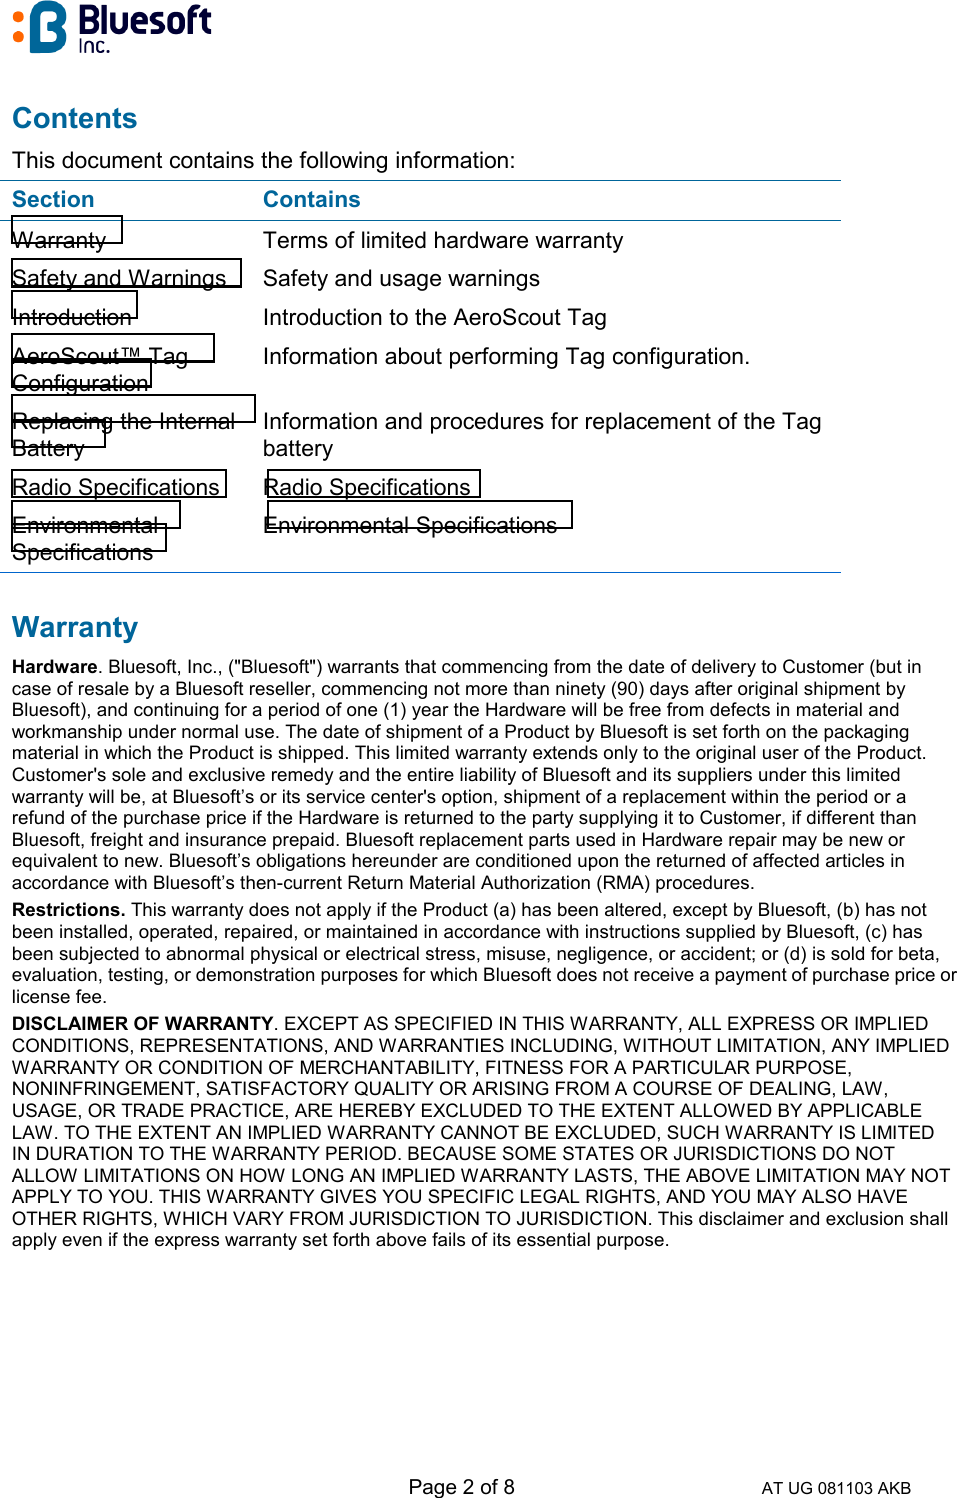   Page 2 of 8 AT UG 081103 AKB Contents This document contains the following information: Section Contains Warranty  Terms of limited hardware warranty Safety and Warnings  Safety and usage warnings Introduction  Introduction to the AeroScout Tag AeroScout™ Tag Configuration Information about performing Tag configuration. Replacing the Internal Battery Information and procedures for replacement of the Tag battery Radio Specifications  Radio Specifications Environmental Specifications Environmental Specifications Warranty Hardware. Bluesoft, Inc., (&quot;Bluesoft&quot;) warrants that commencing from the date of delivery to Customer (but in case of resale by a Bluesoft reseller, commencing not more than ninety (90) days after original shipment by Bluesoft), and continuing for a period of one (1) year the Hardware will be free from defects in material and workmanship under normal use. The date of shipment of a Product by Bluesoft is set forth on the packaging material in which the Product is shipped. This limited warranty extends only to the original user of the Product. Customer&apos;s sole and exclusive remedy and the entire liability of Bluesoft and its suppliers under this limited warranty will be, at Bluesoft’s or its service center&apos;s option, shipment of a replacement within the period or a refund of the purchase price if the Hardware is returned to the party supplying it to Customer, if different than Bluesoft, freight and insurance prepaid. Bluesoft replacement parts used in Hardware repair may be new or equivalent to new. Bluesoft’s obligations hereunder are conditioned upon the returned of affected articles in accordance with Bluesoft’s then-current Return Material Authorization (RMA) procedures.  Restrictions. This warranty does not apply if the Product (a) has been altered, except by Bluesoft, (b) has not been installed, operated, repaired, or maintained in accordance with instructions supplied by Bluesoft, (c) has been subjected to abnormal physical or electrical stress, misuse, negligence, or accident; or (d) is sold for beta, evaluation, testing, or demonstration purposes for which Bluesoft does not receive a payment of purchase price or license fee.  DISCLAIMER OF WARRANTY. EXCEPT AS SPECIFIED IN THIS WARRANTY, ALL EXPRESS OR IMPLIED CONDITIONS, REPRESENTATIONS, AND WARRANTIES INCLUDING, WITHOUT LIMITATION, ANY IMPLIED WARRANTY OR CONDITION OF MERCHANTABILITY, FITNESS FOR A PARTICULAR PURPOSE, NONINFRINGEMENT, SATISFACTORY QUALITY OR ARISING FROM A COURSE OF DEALING, LAW, USAGE, OR TRADE PRACTICE, ARE HEREBY EXCLUDED TO THE EXTENT ALLOWED BY APPLICABLE LAW. TO THE EXTENT AN IMPLIED WARRANTY CANNOT BE EXCLUDED, SUCH WARRANTY IS LIMITED IN DURATION TO THE WARRANTY PERIOD. BECAUSE SOME STATES OR JURISDICTIONS DO NOT ALLOW LIMITATIONS ON HOW LONG AN IMPLIED WARRANTY LASTS, THE ABOVE LIMITATION MAY NOT APPLY TO YOU. THIS WARRANTY GIVES YOU SPECIFIC LEGAL RIGHTS, AND YOU MAY ALSO HAVE OTHER RIGHTS, WHICH VARY FROM JURISDICTION TO JURISDICTION. This disclaimer and exclusion shall apply even if the express warranty set forth above fails of its essential purpose.      